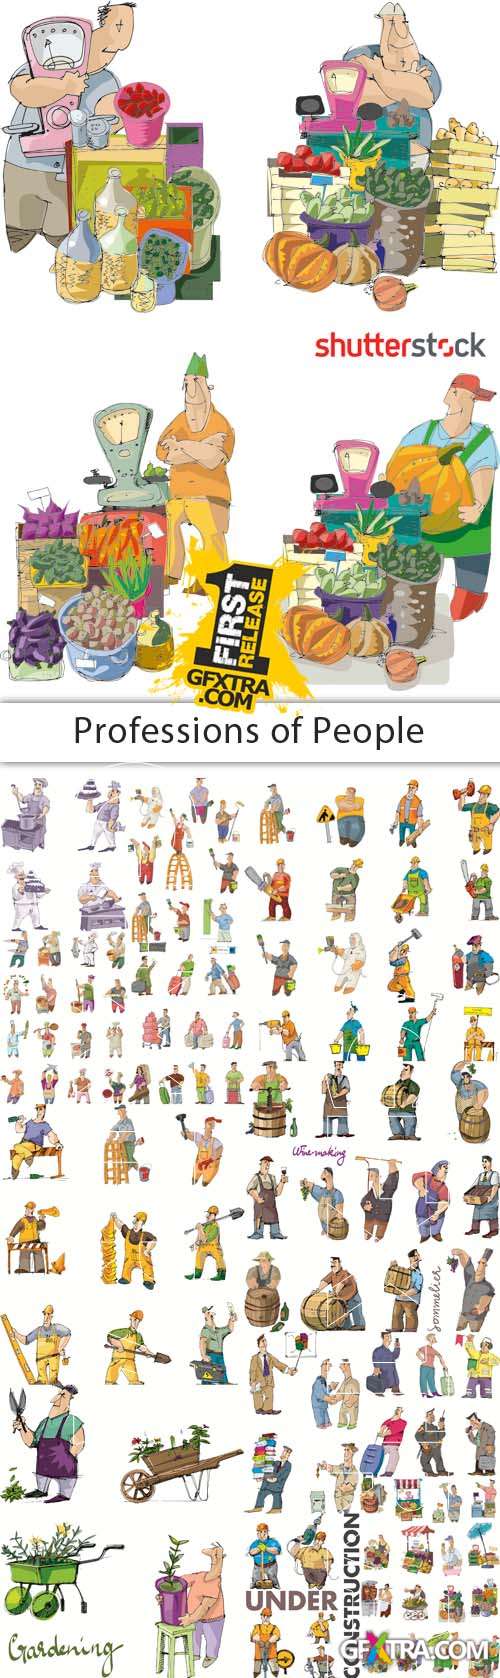 Professions of People 25xEPS